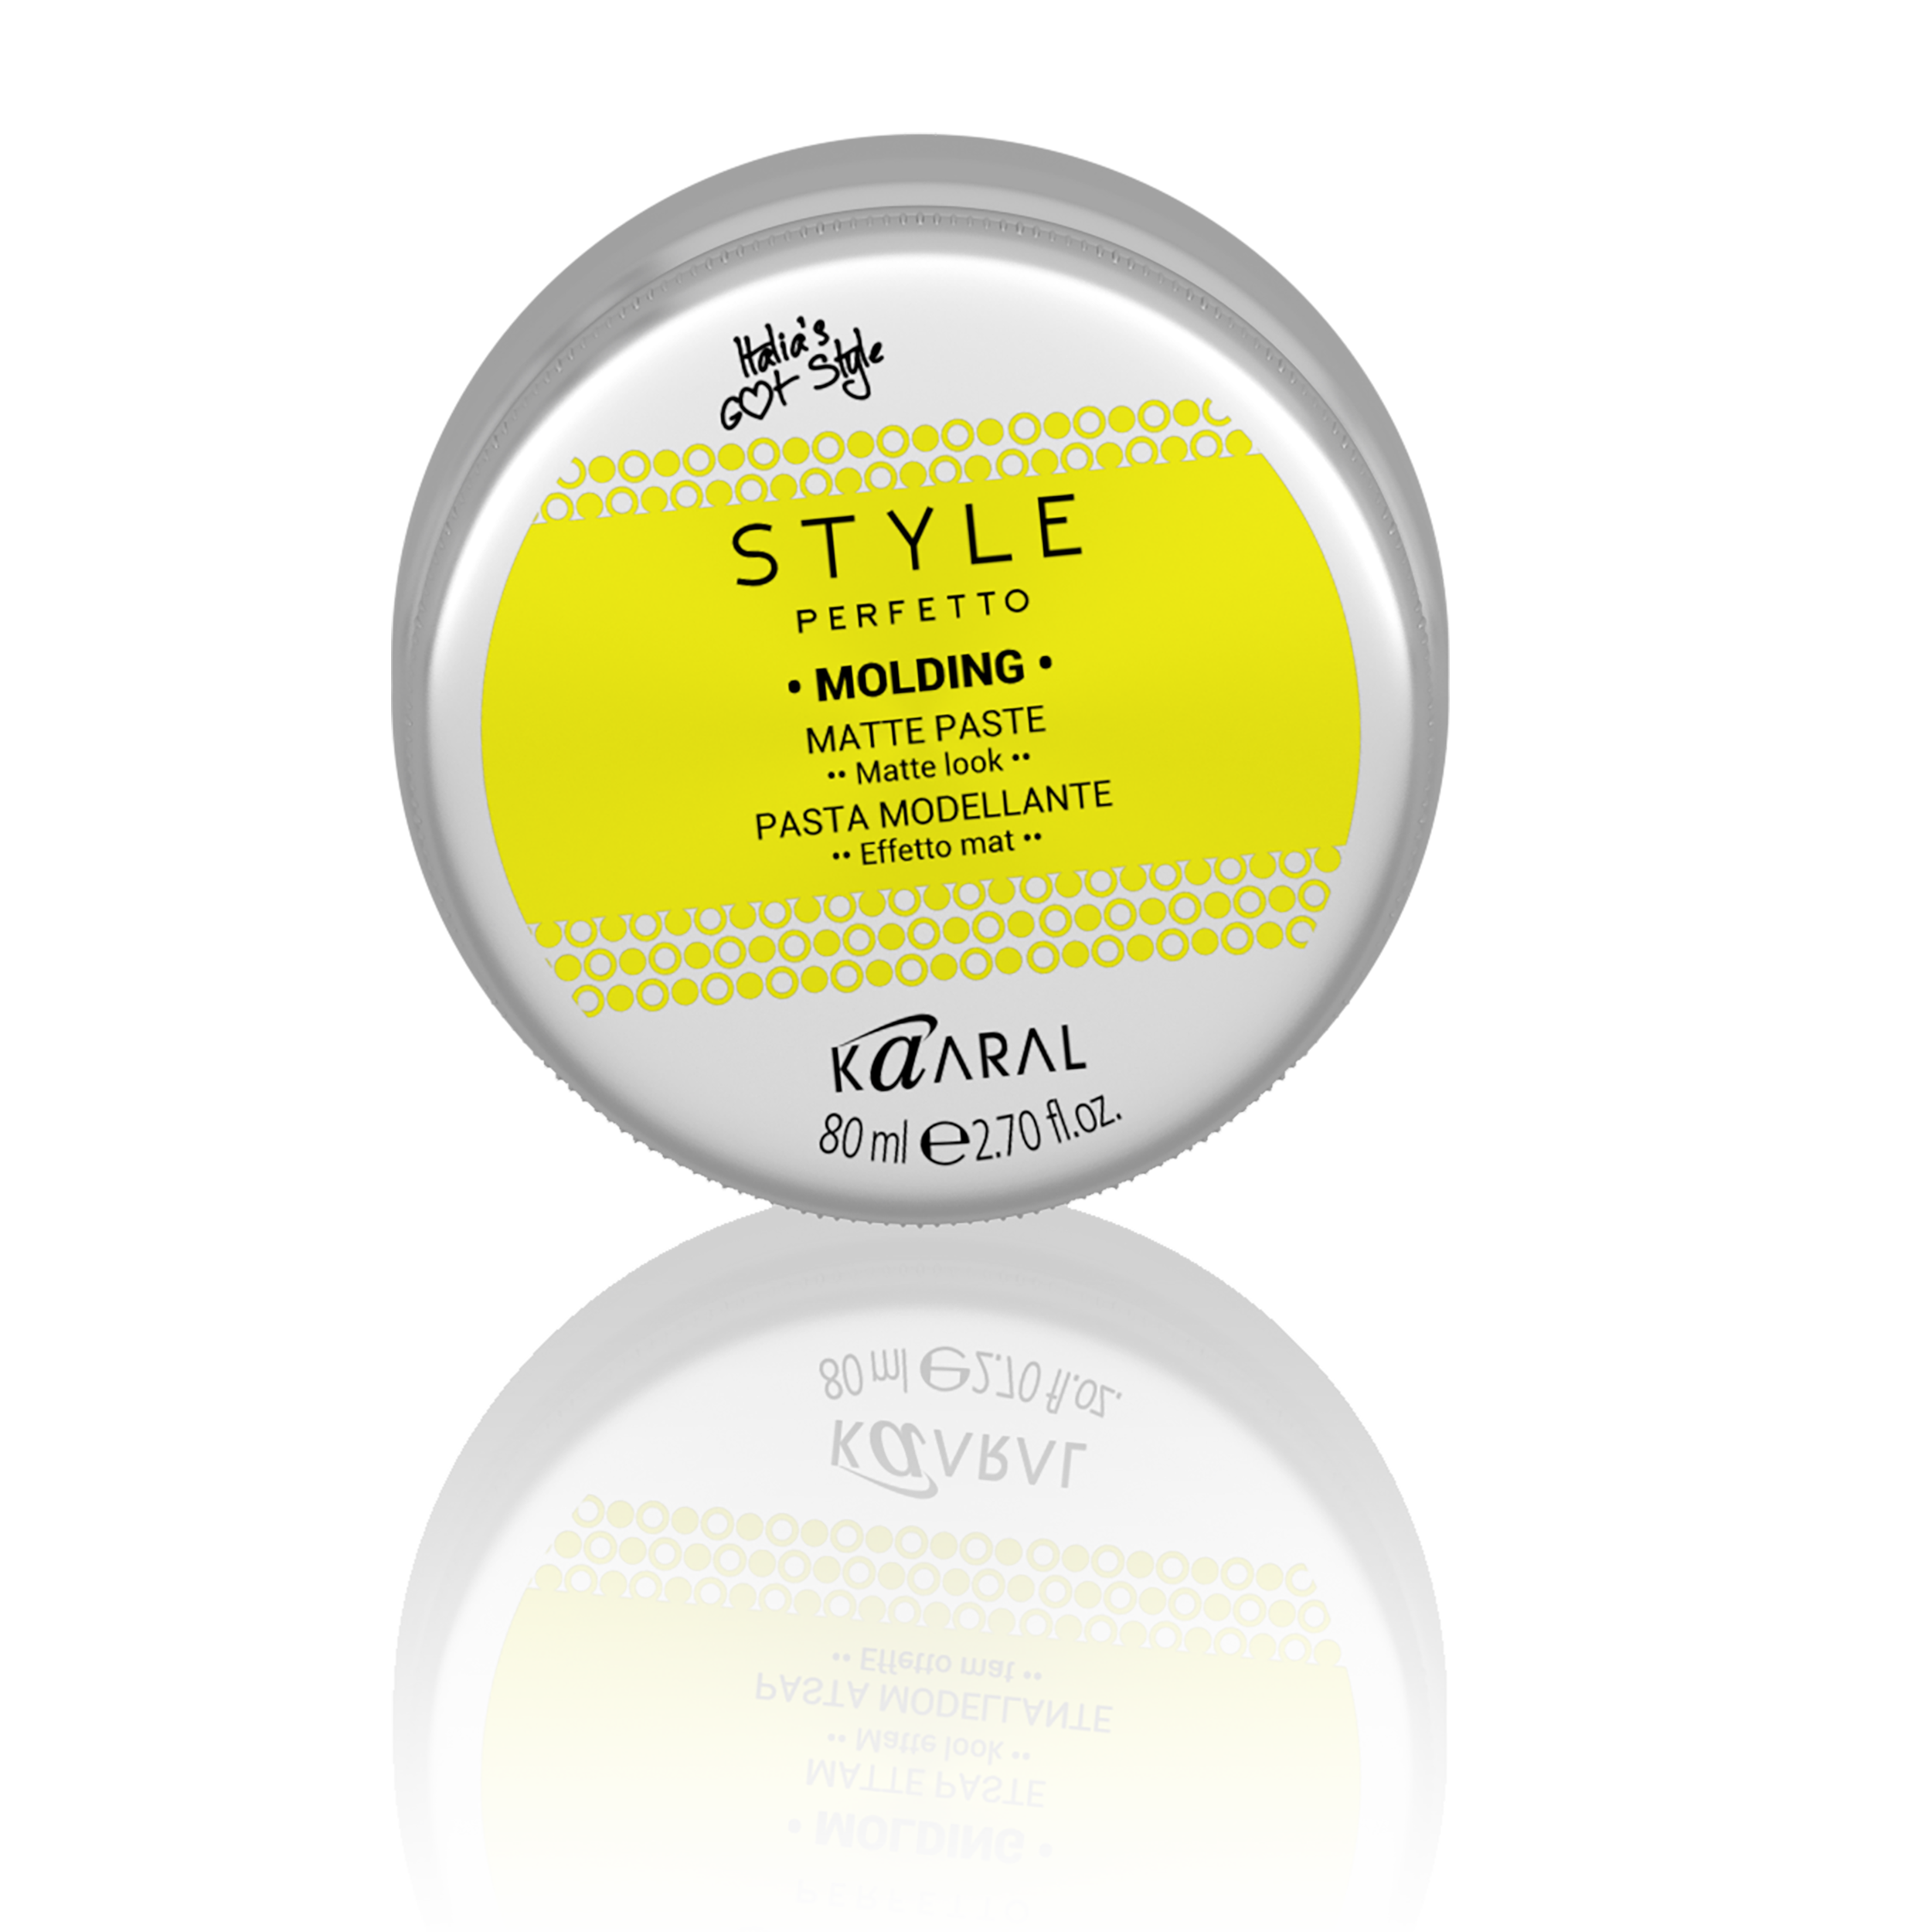 Kaaral - Style Perfetto Molding Matte Paste - Creata Beauty - Professional Beauty Products